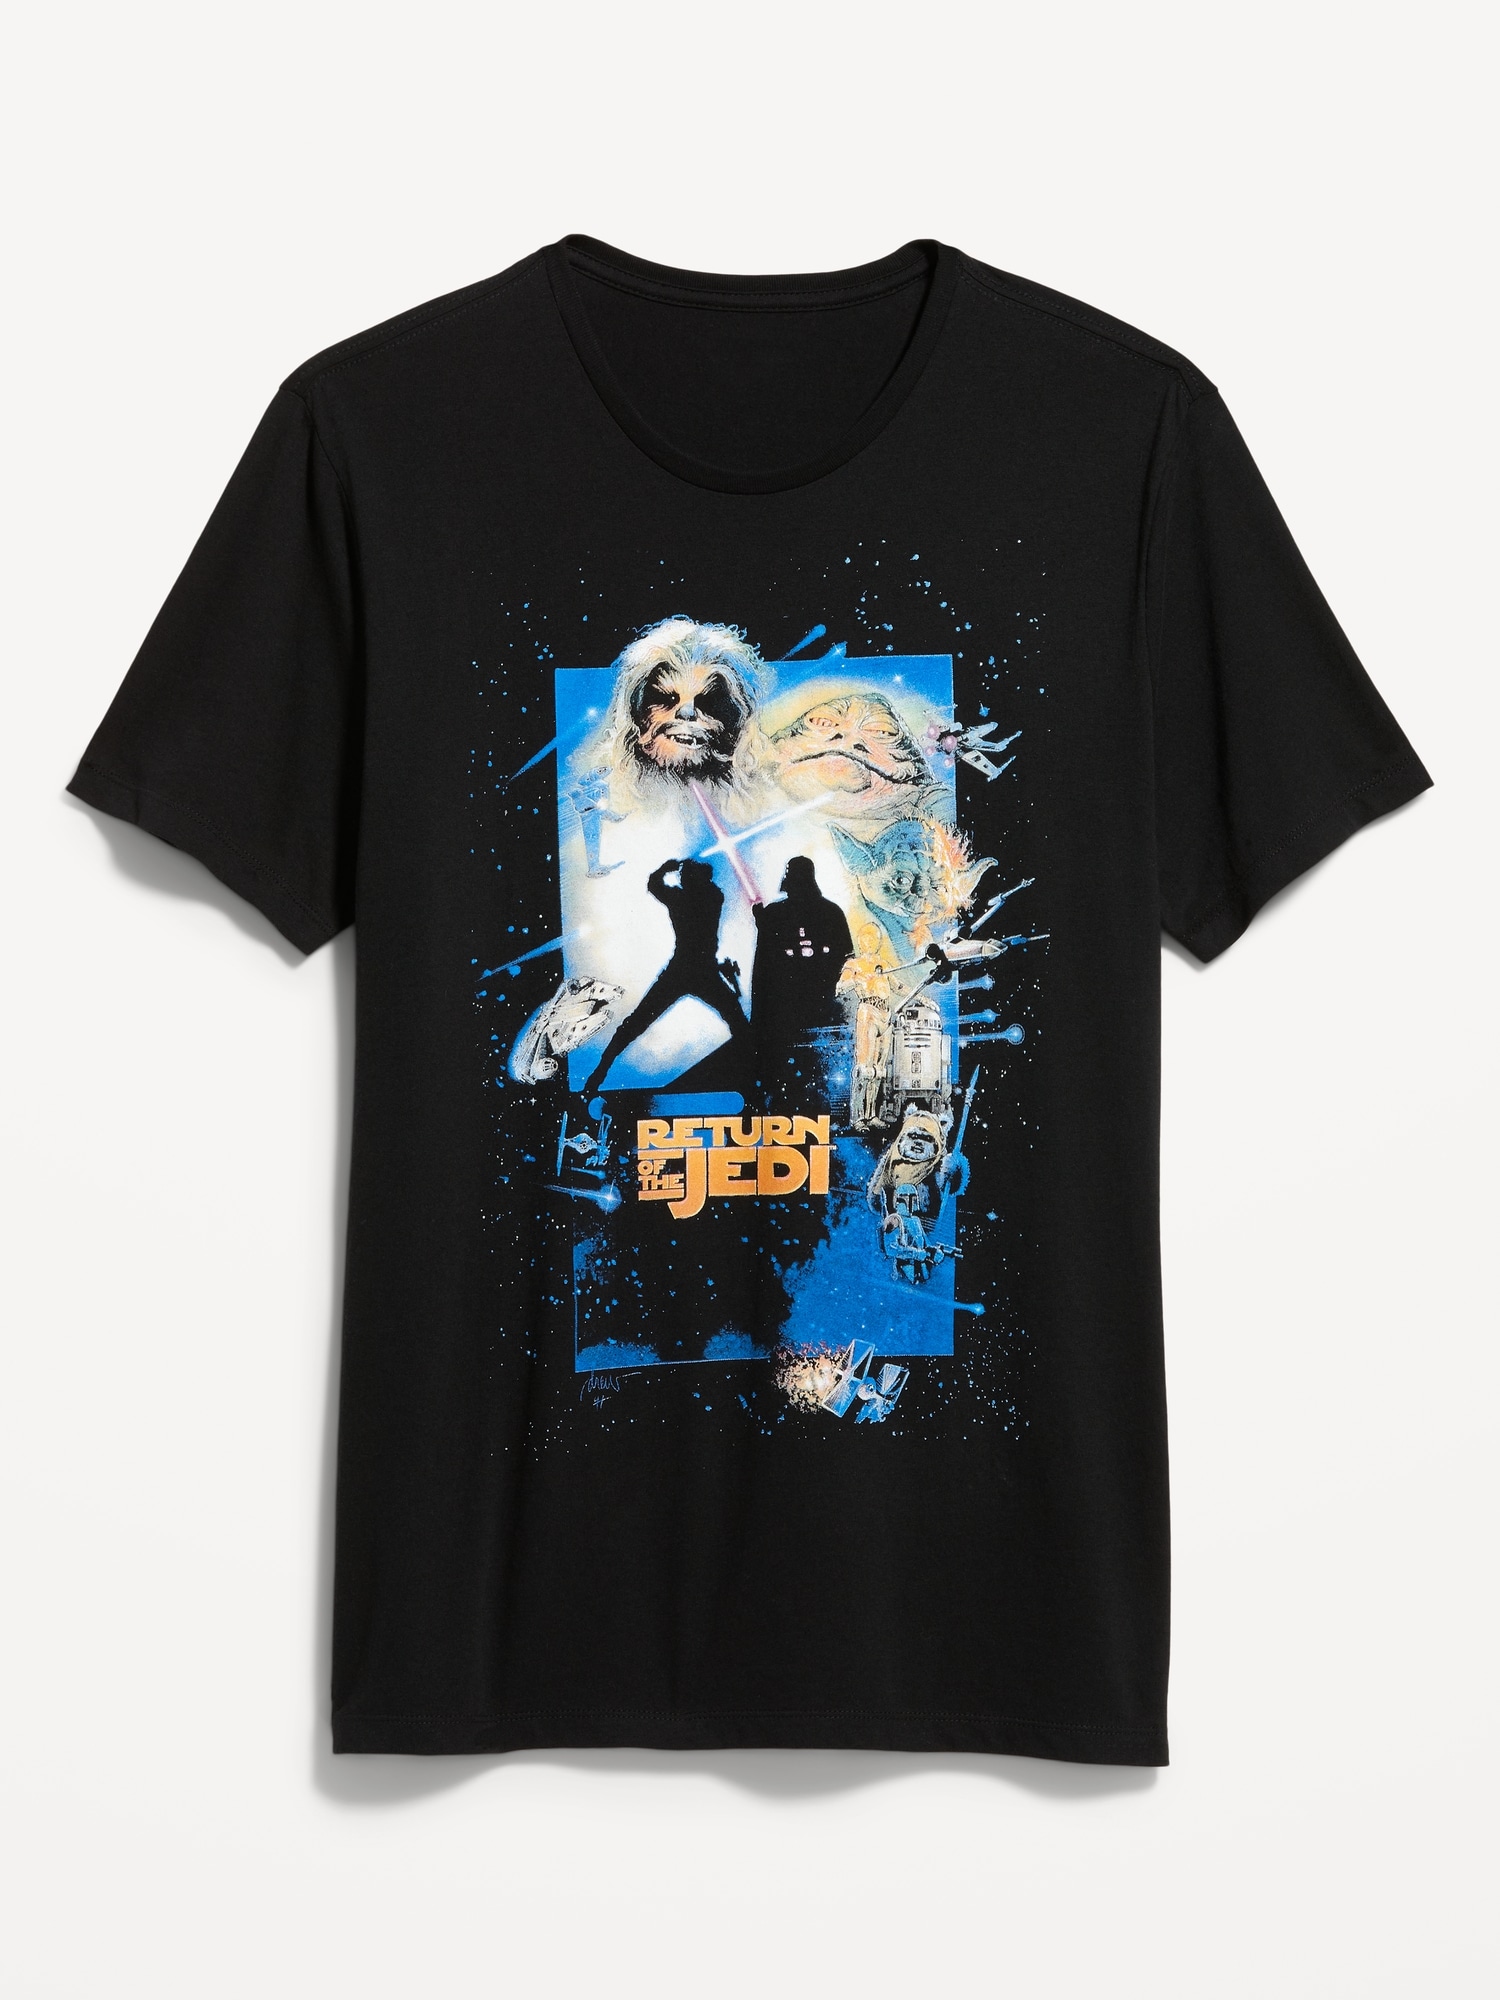 Old Navy Star Wars™ "Return of the Jedi" Gender-Neutral T-Shirt for Adults black. 1